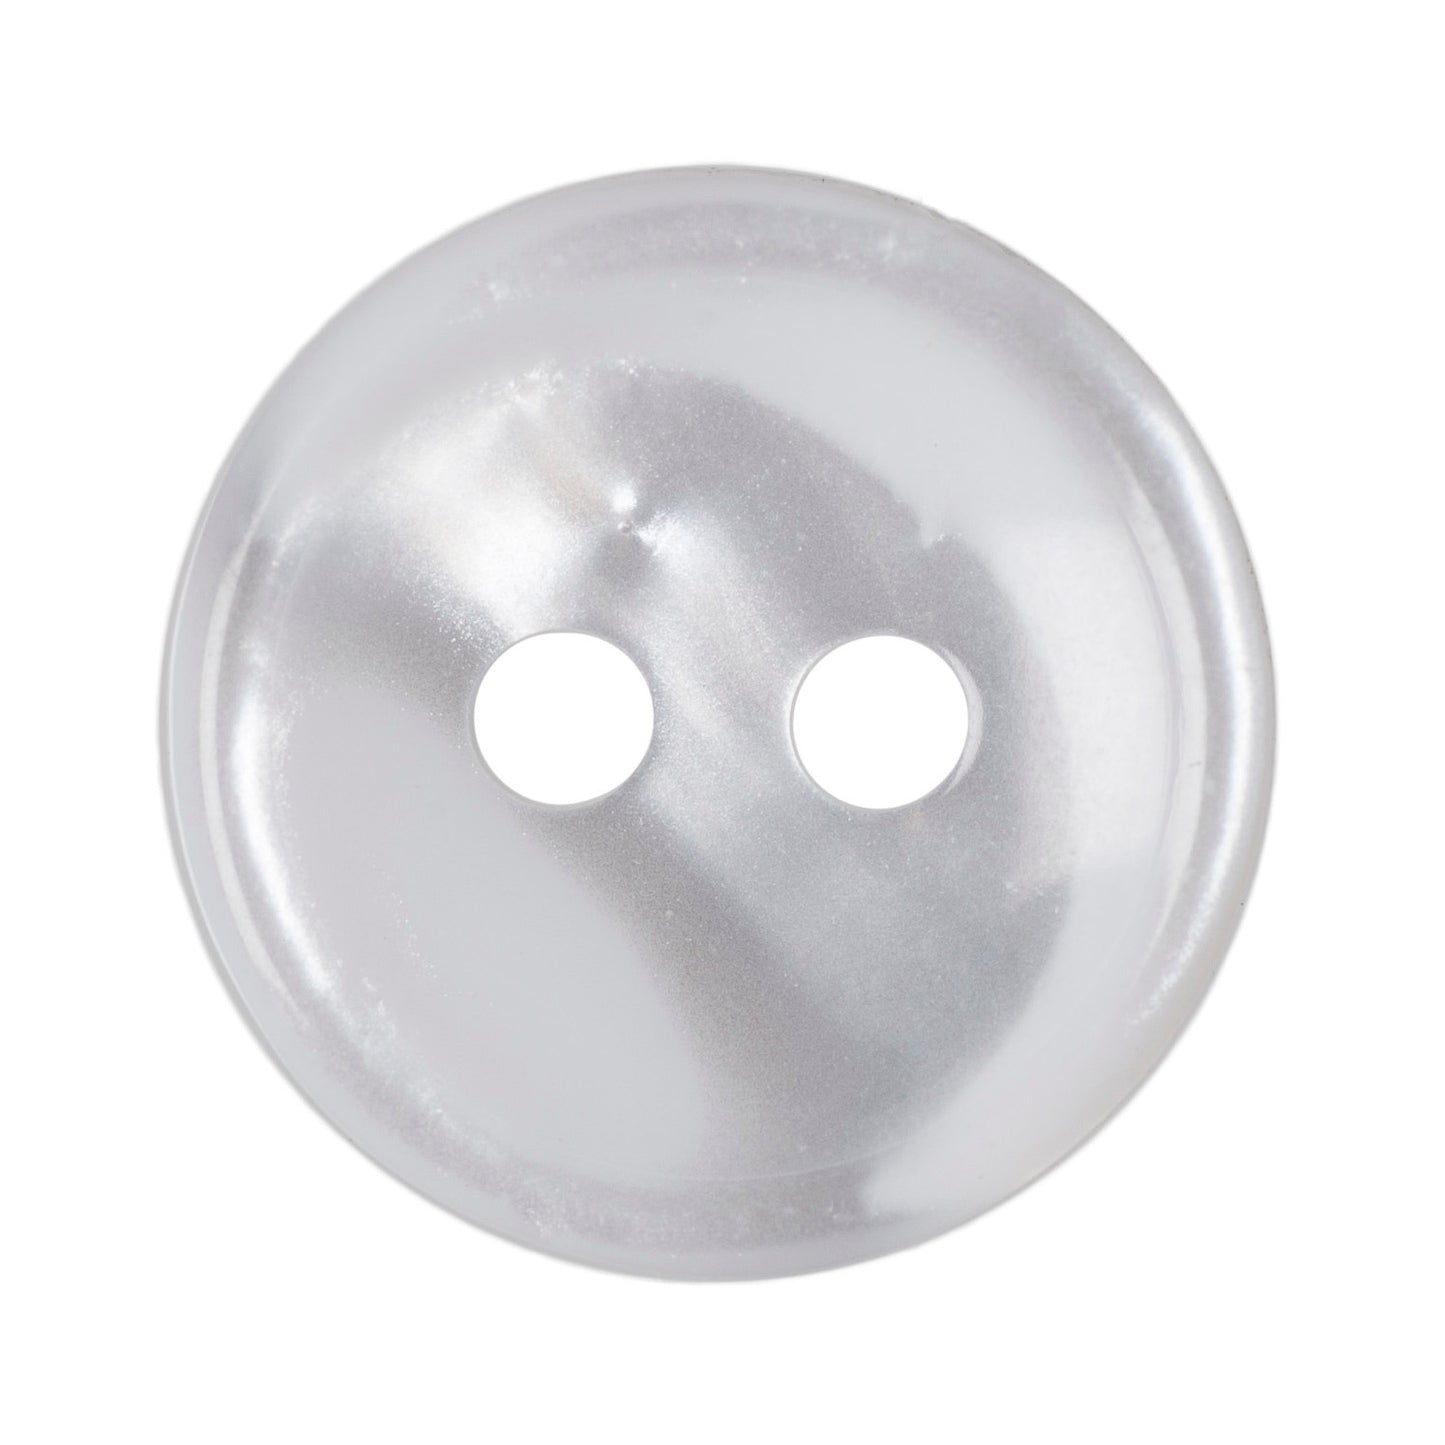 Polyester 2 Hole Stripe Buttons - 12mm - Pearl White [LB18.2]